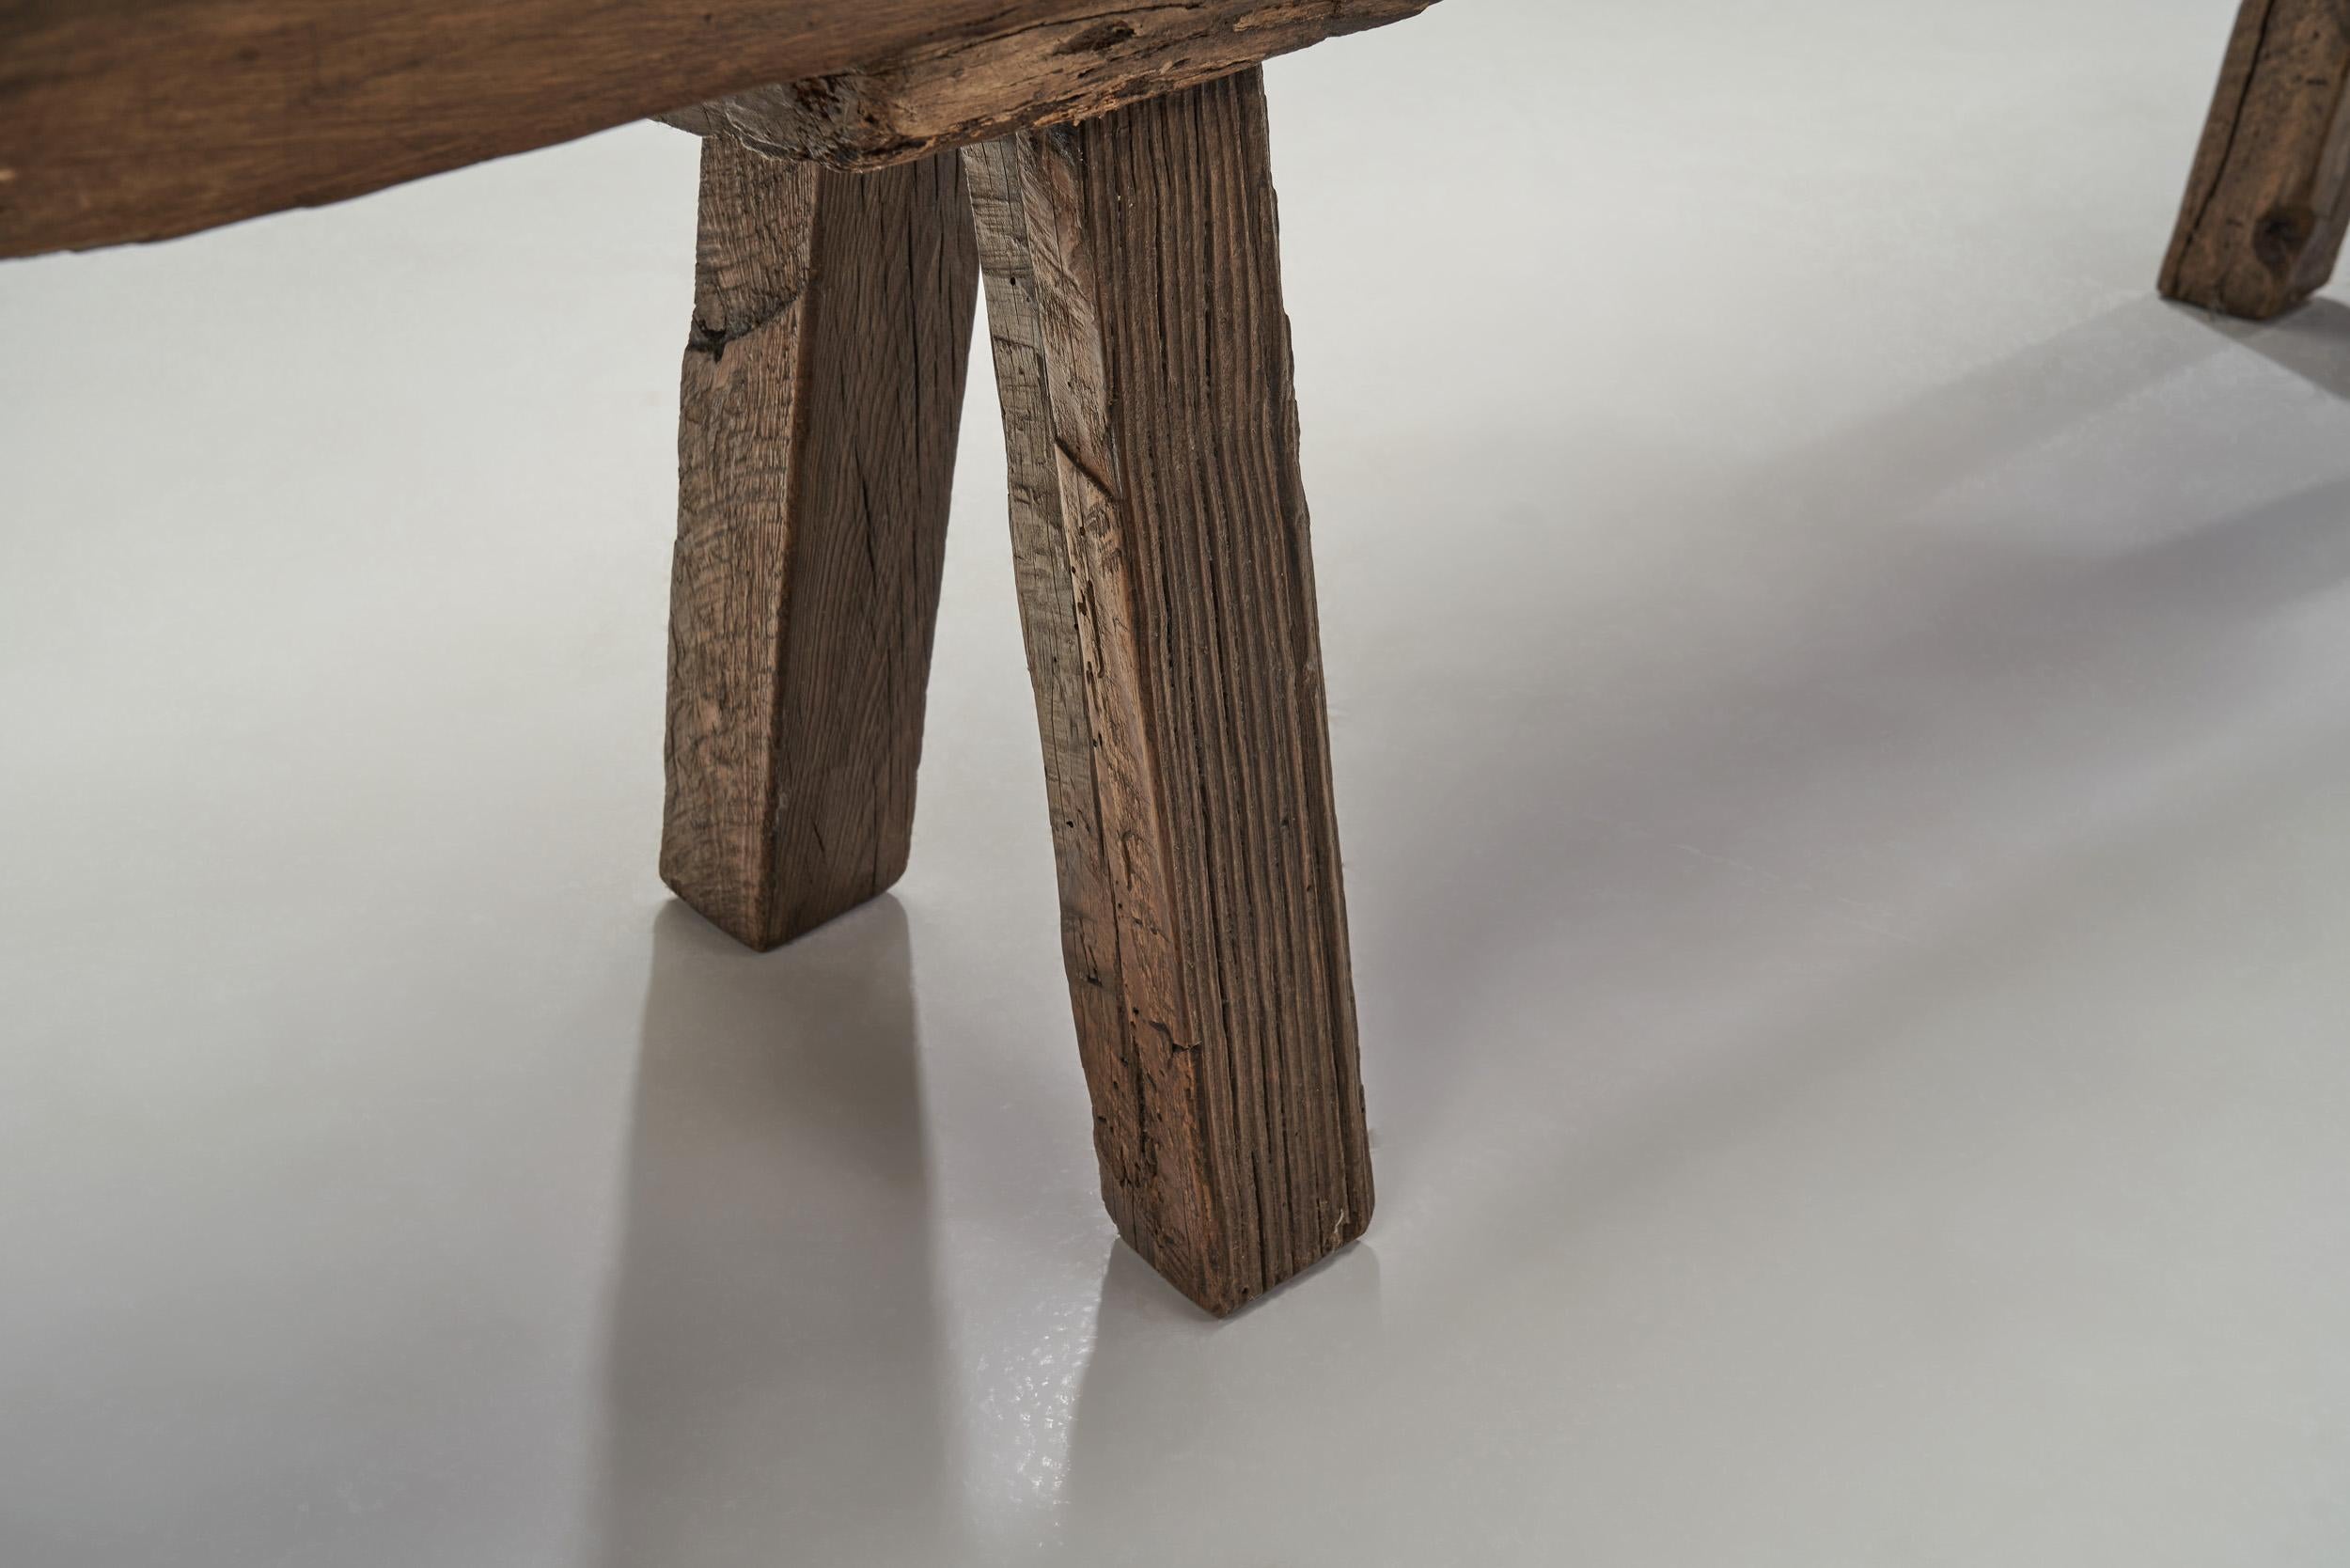 Rustic European Solid Wood Table, Europe ca 1940s For Sale 9